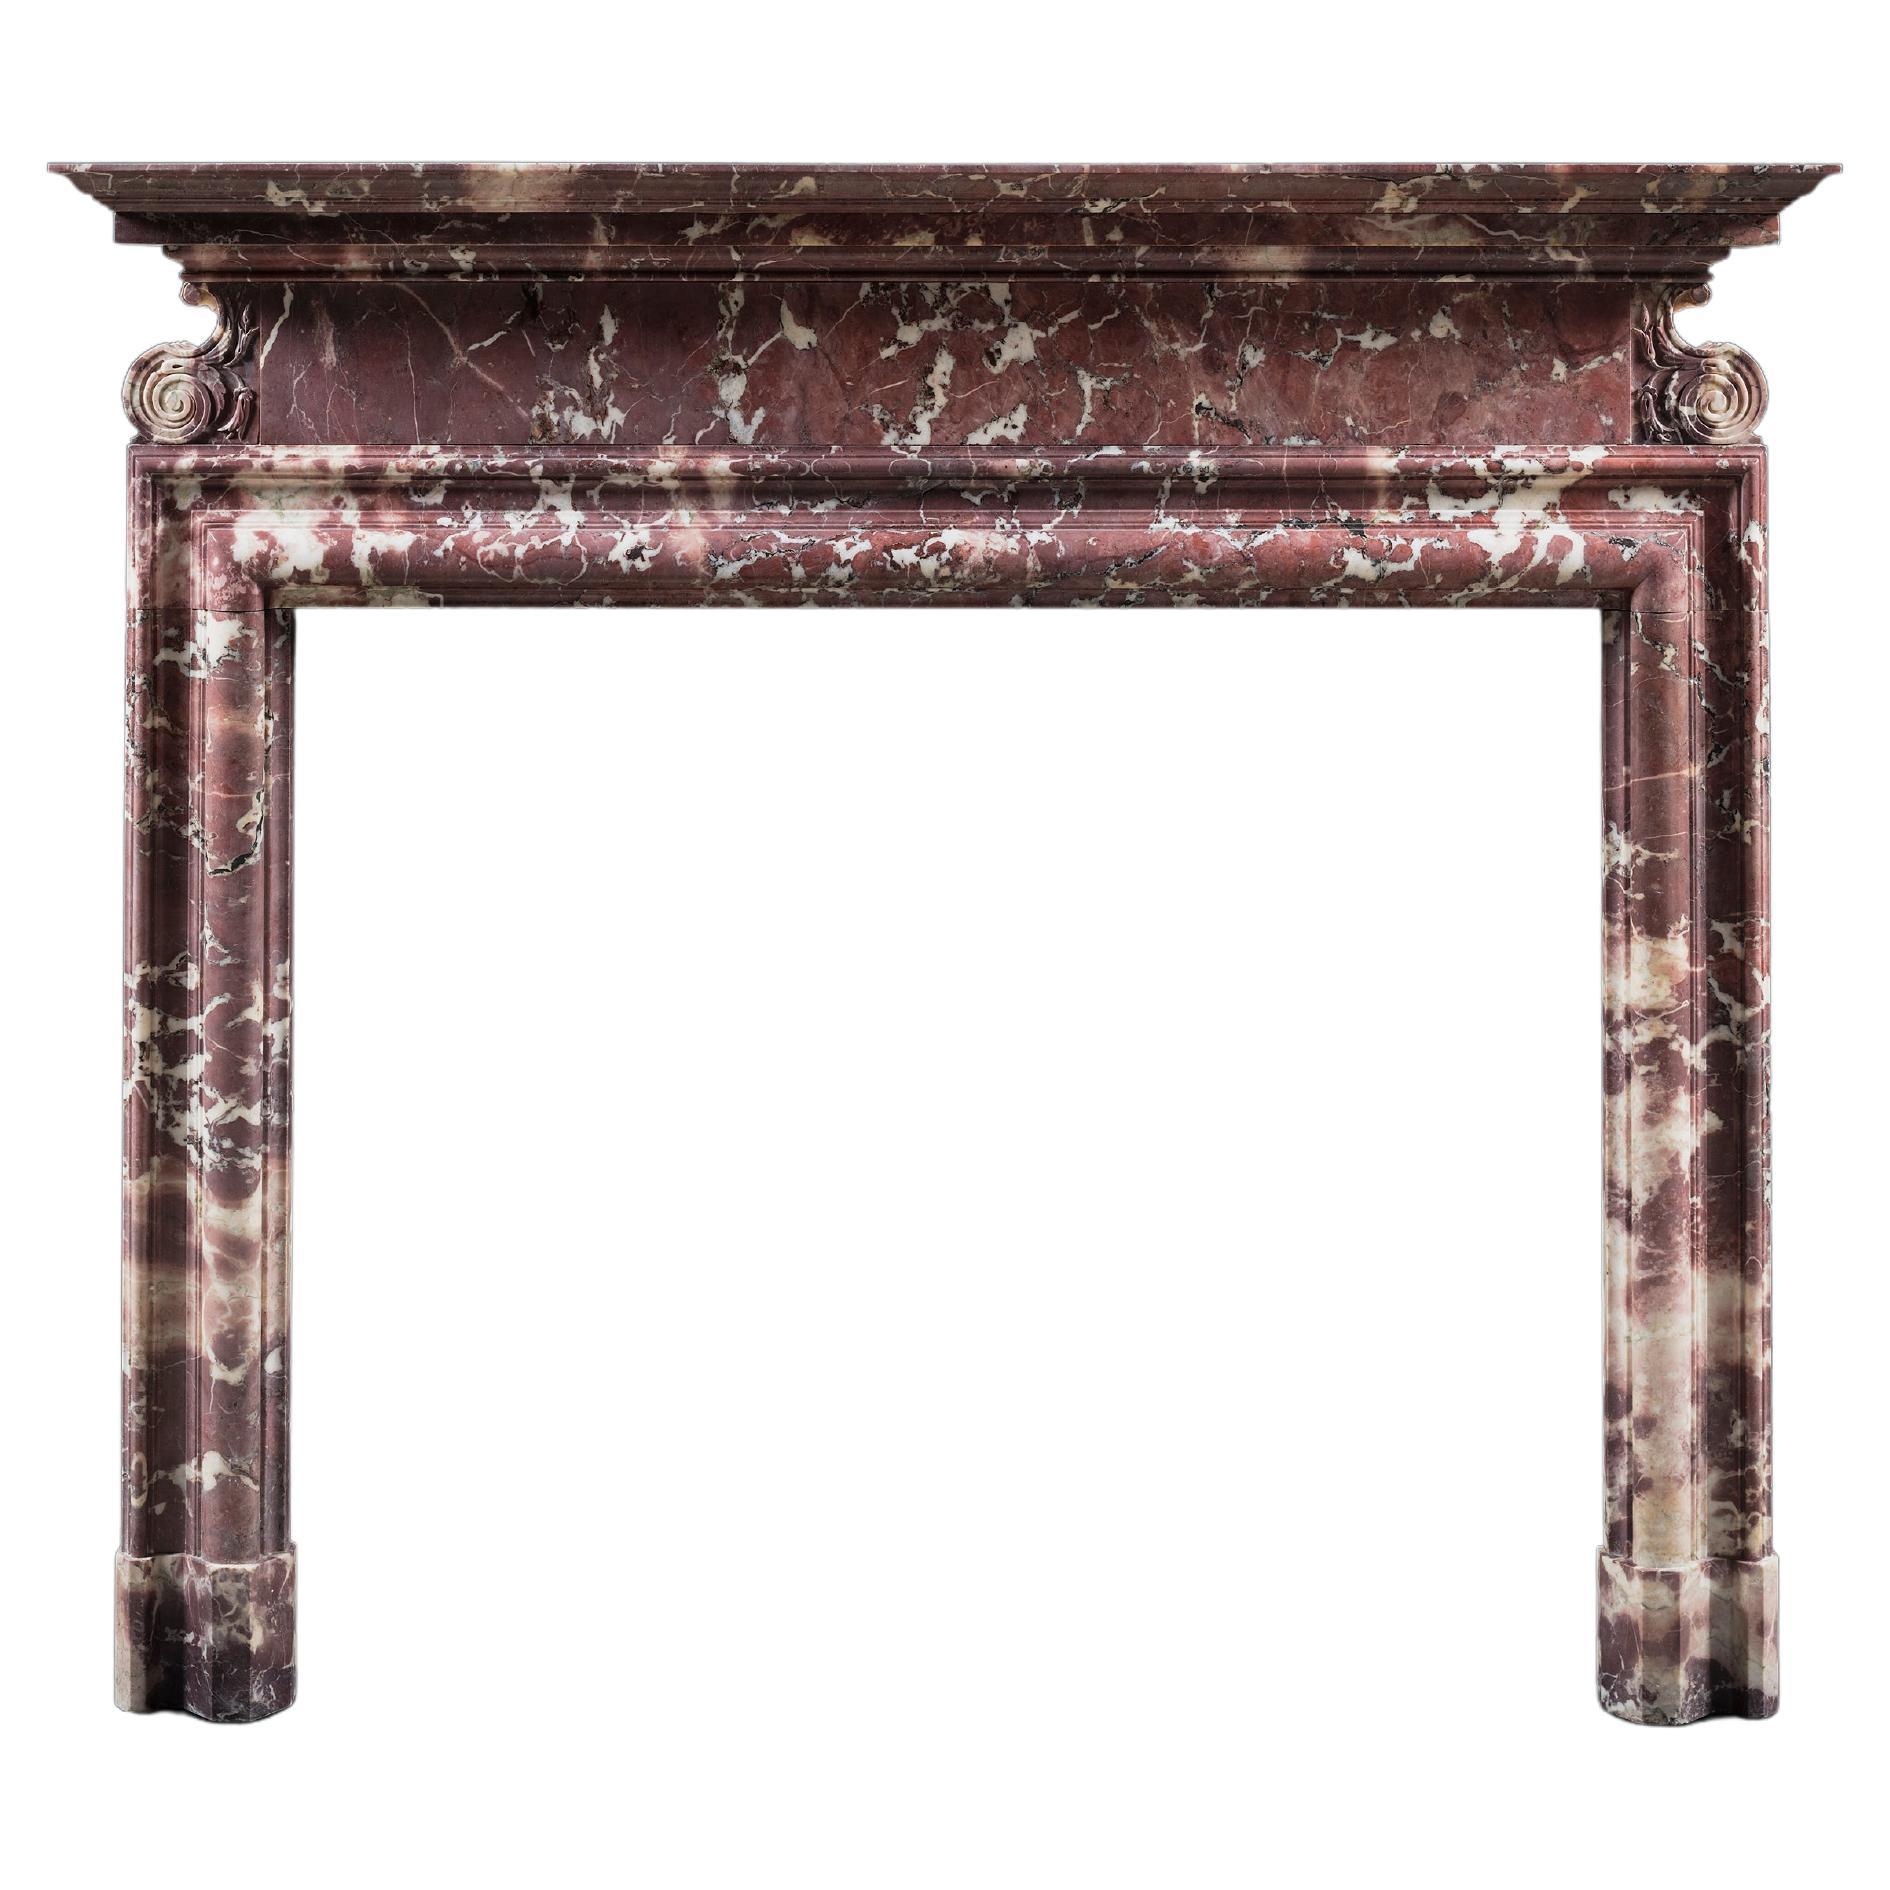 A Georgian Revival Bolection Chimneypiece Carved in Breccia Medicea marble For Sale